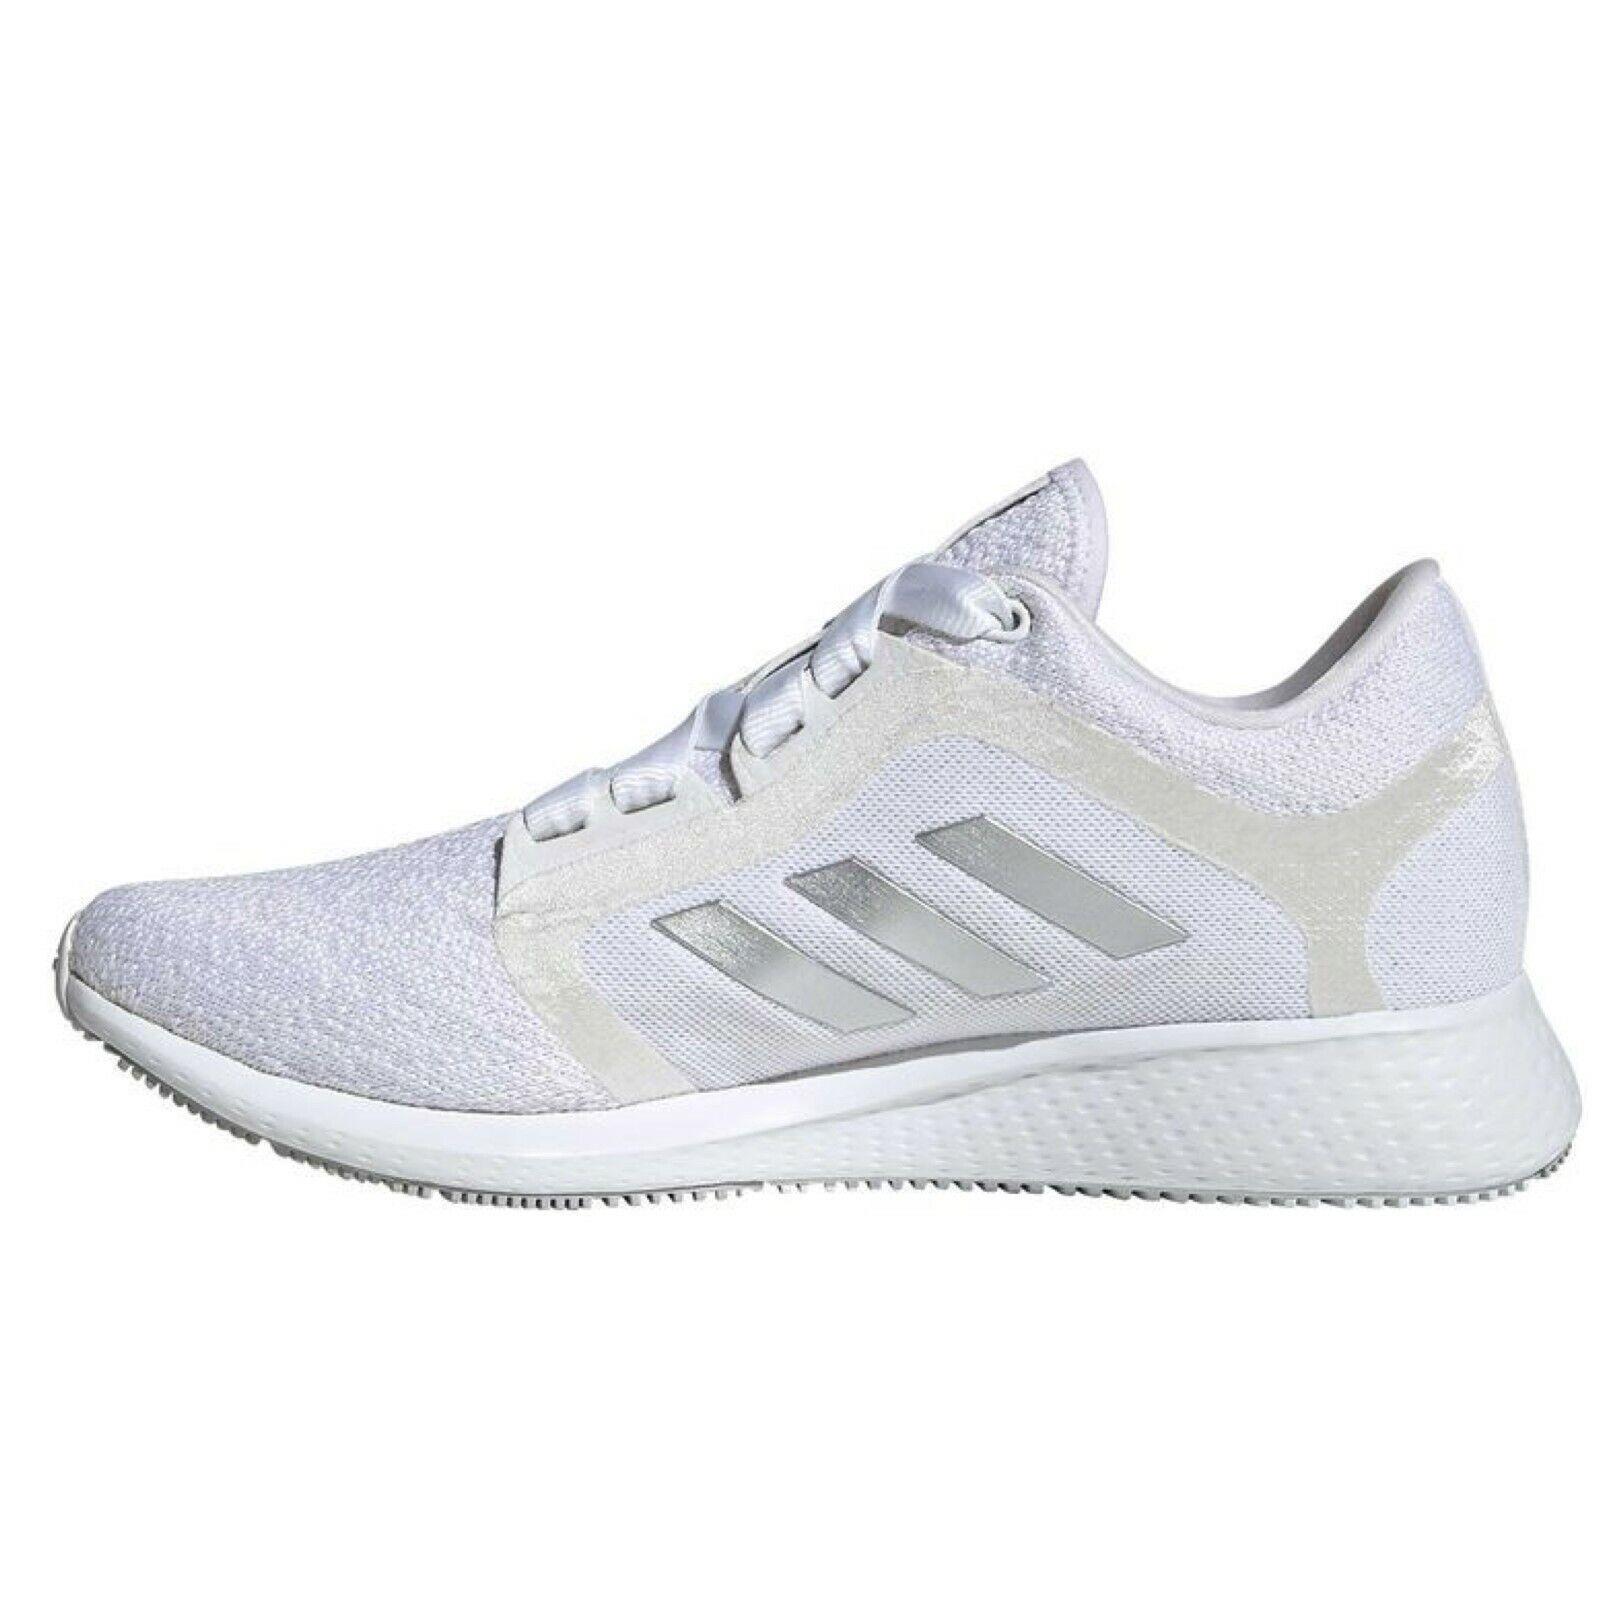 Adidas shoes Edge Lux - White , WHITE/SILVER Manufacturer 5